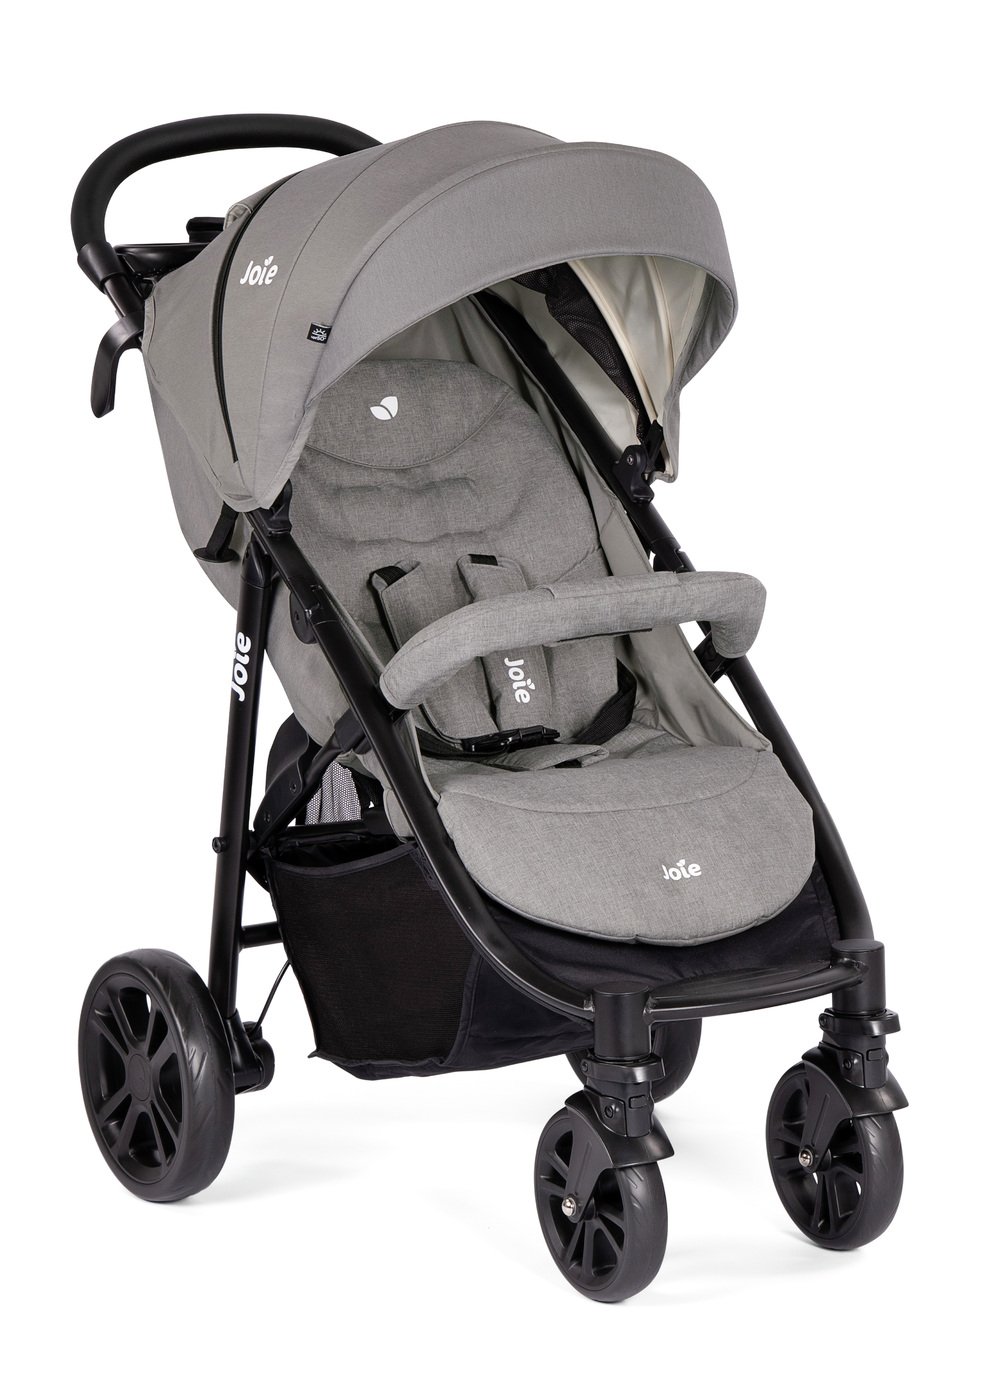 Rain Cover For Joie Litetrax Travel System Charcoal 